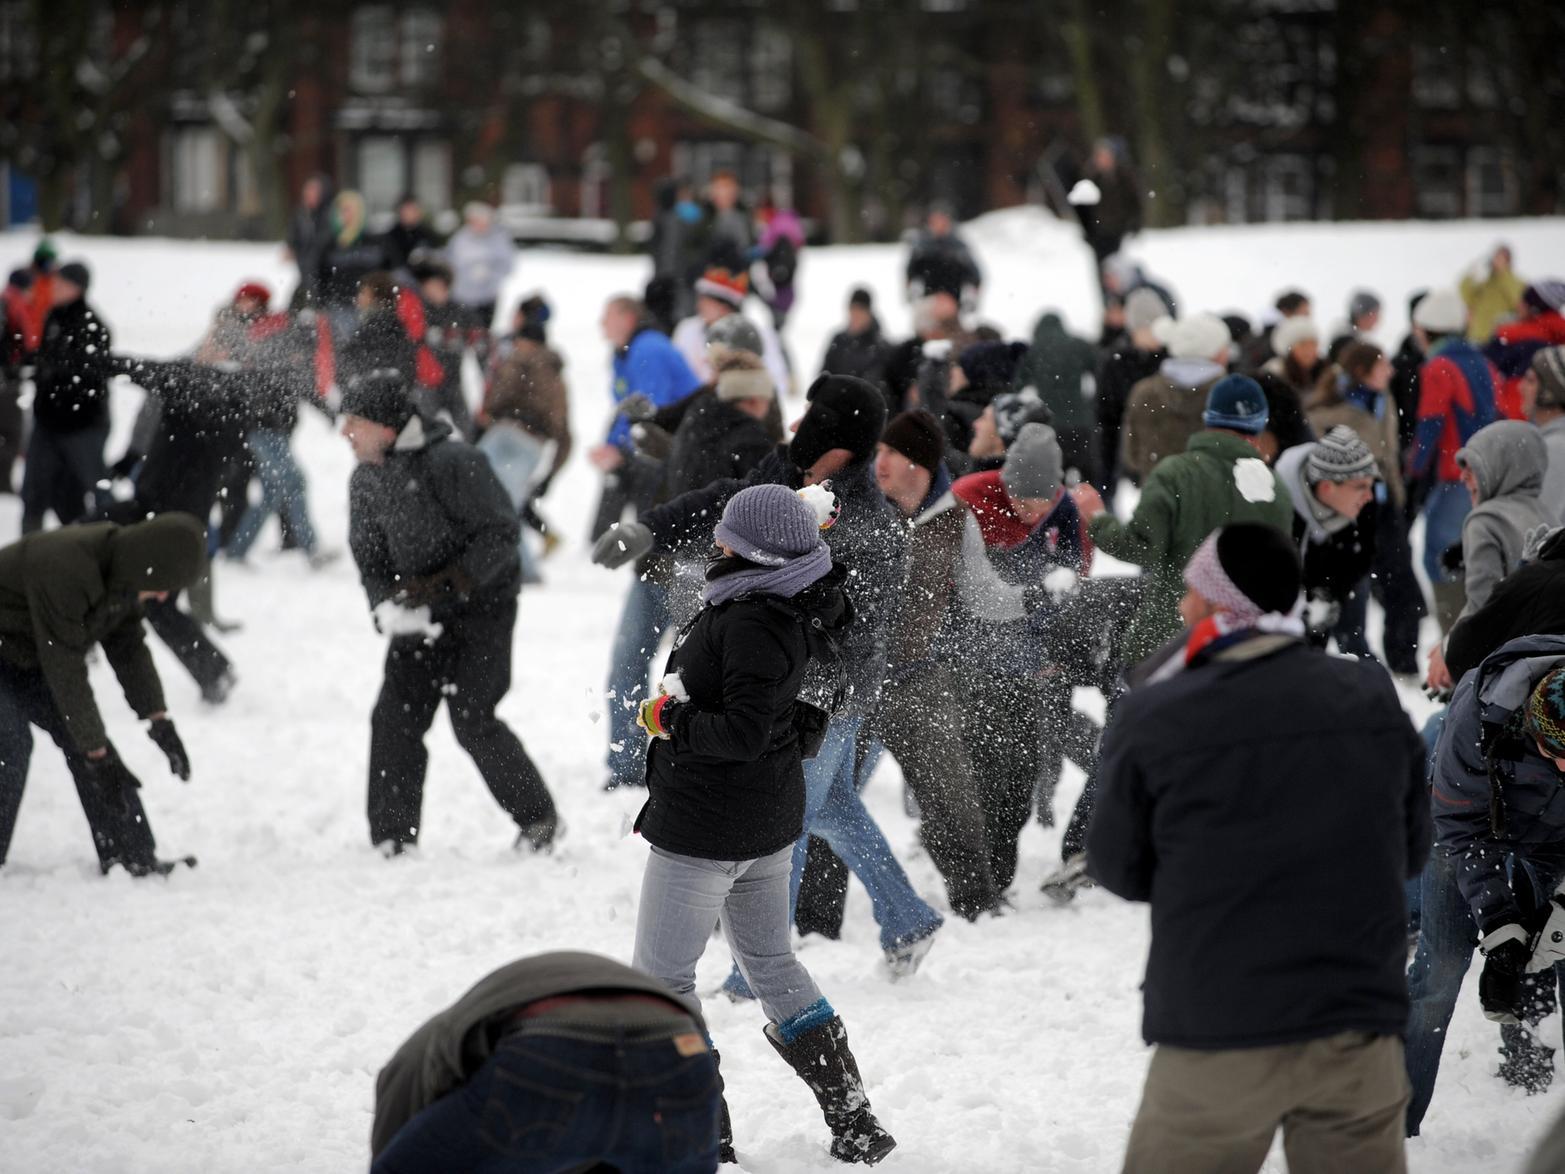 Do you remember this mass snowball fight? PICS: James Hardisty